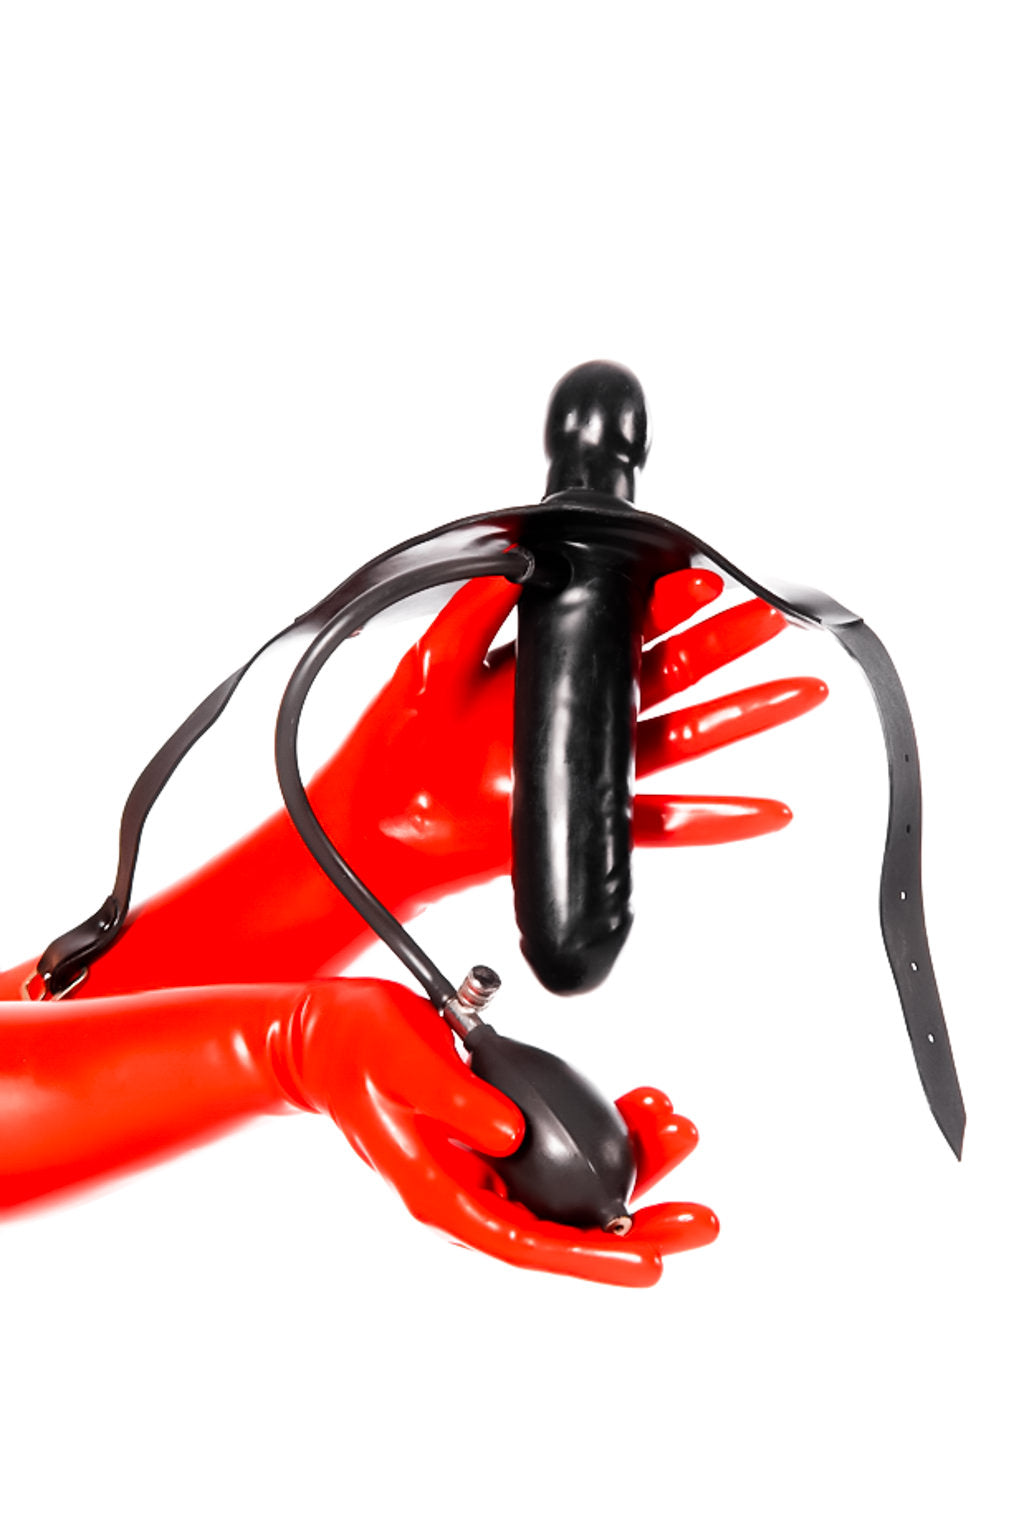 Red latex gloves holding a strap-on inflatable gag with dildo.